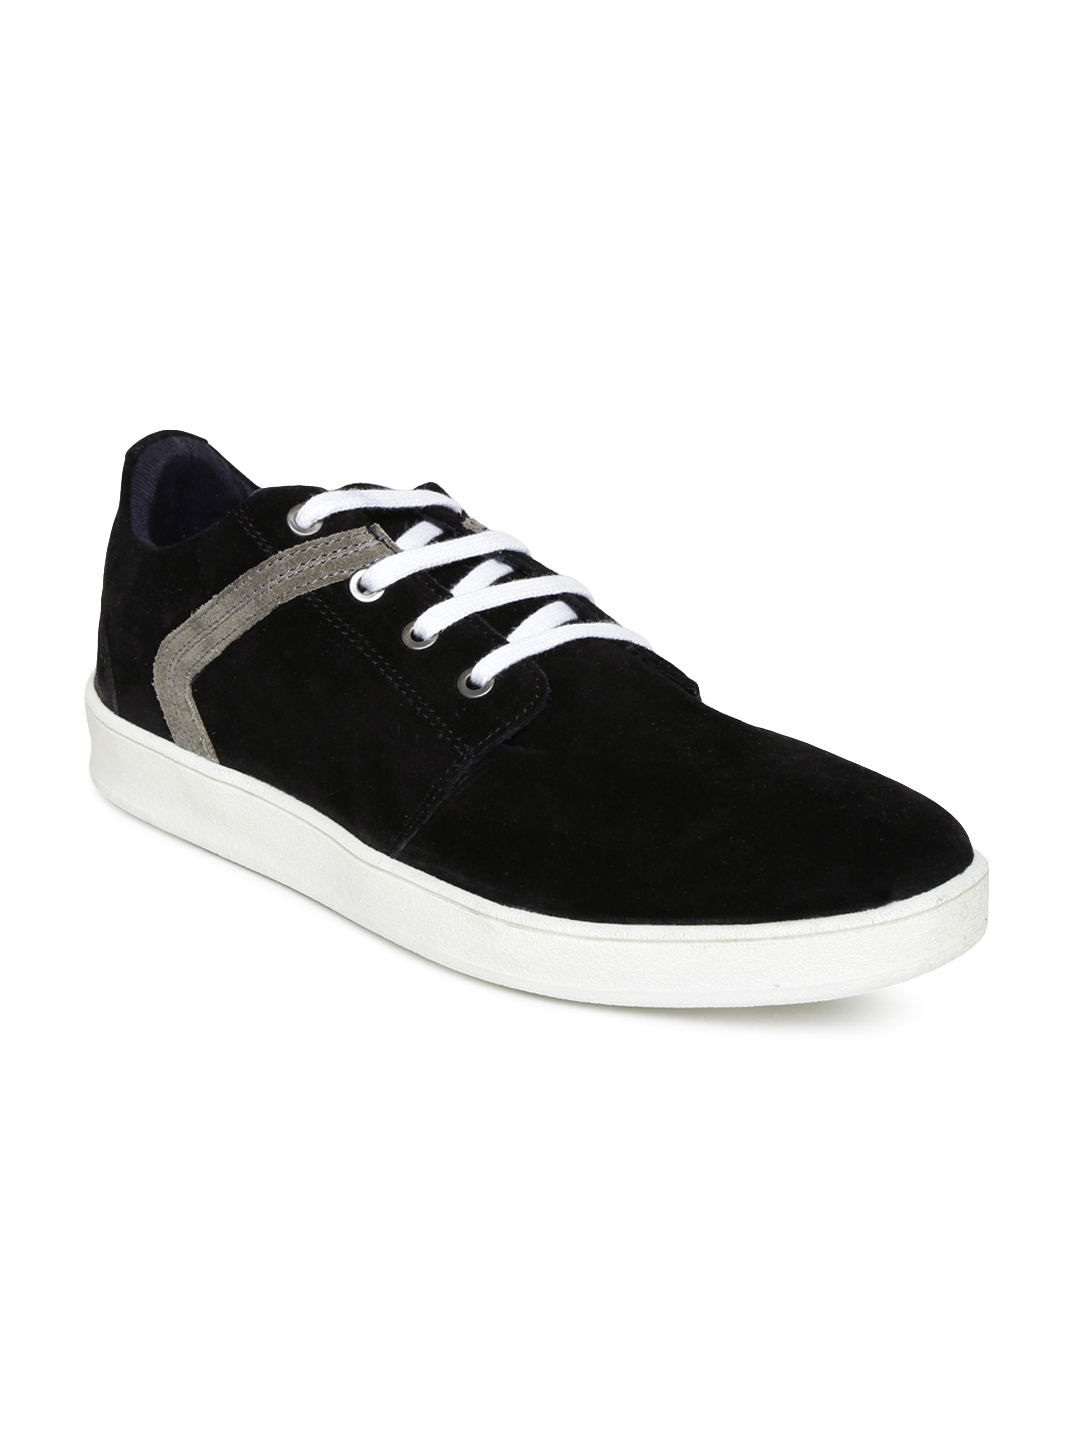 Buy Roadster Men Black Casual Shoes - Casual Shoes for Men 1079800 | Myntra